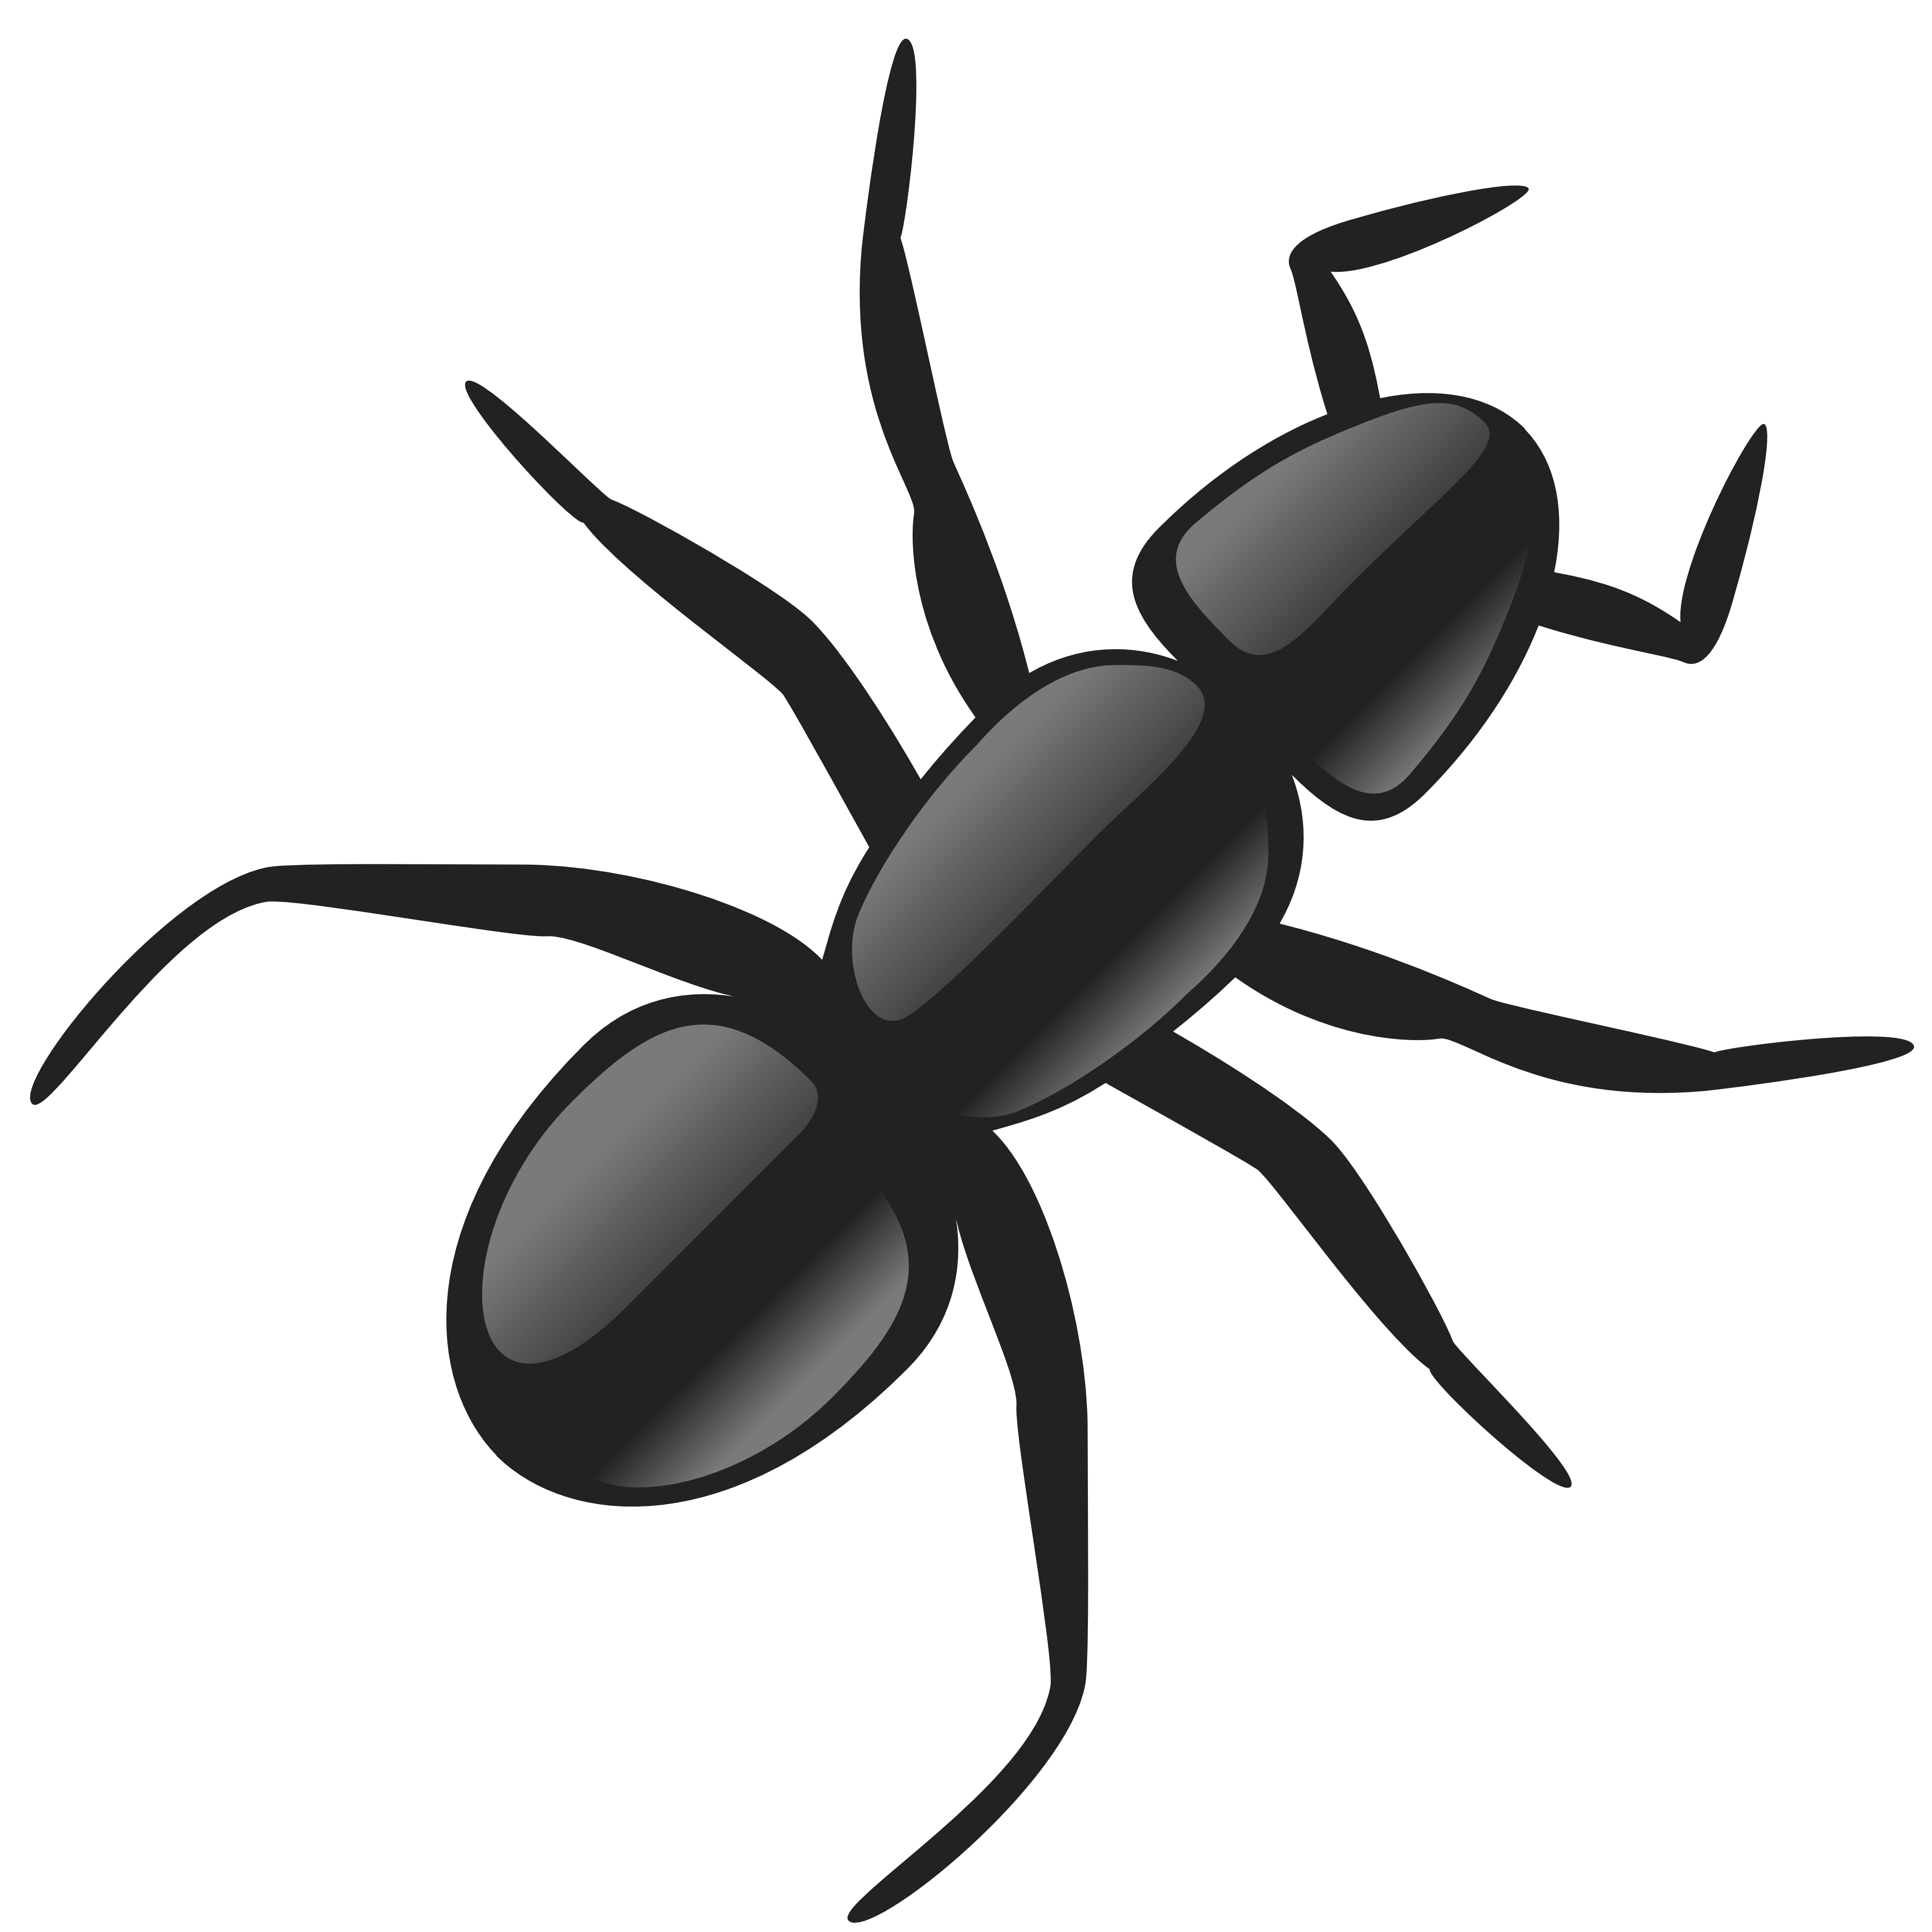 Mosquito clipart bothered. Insect panda free images